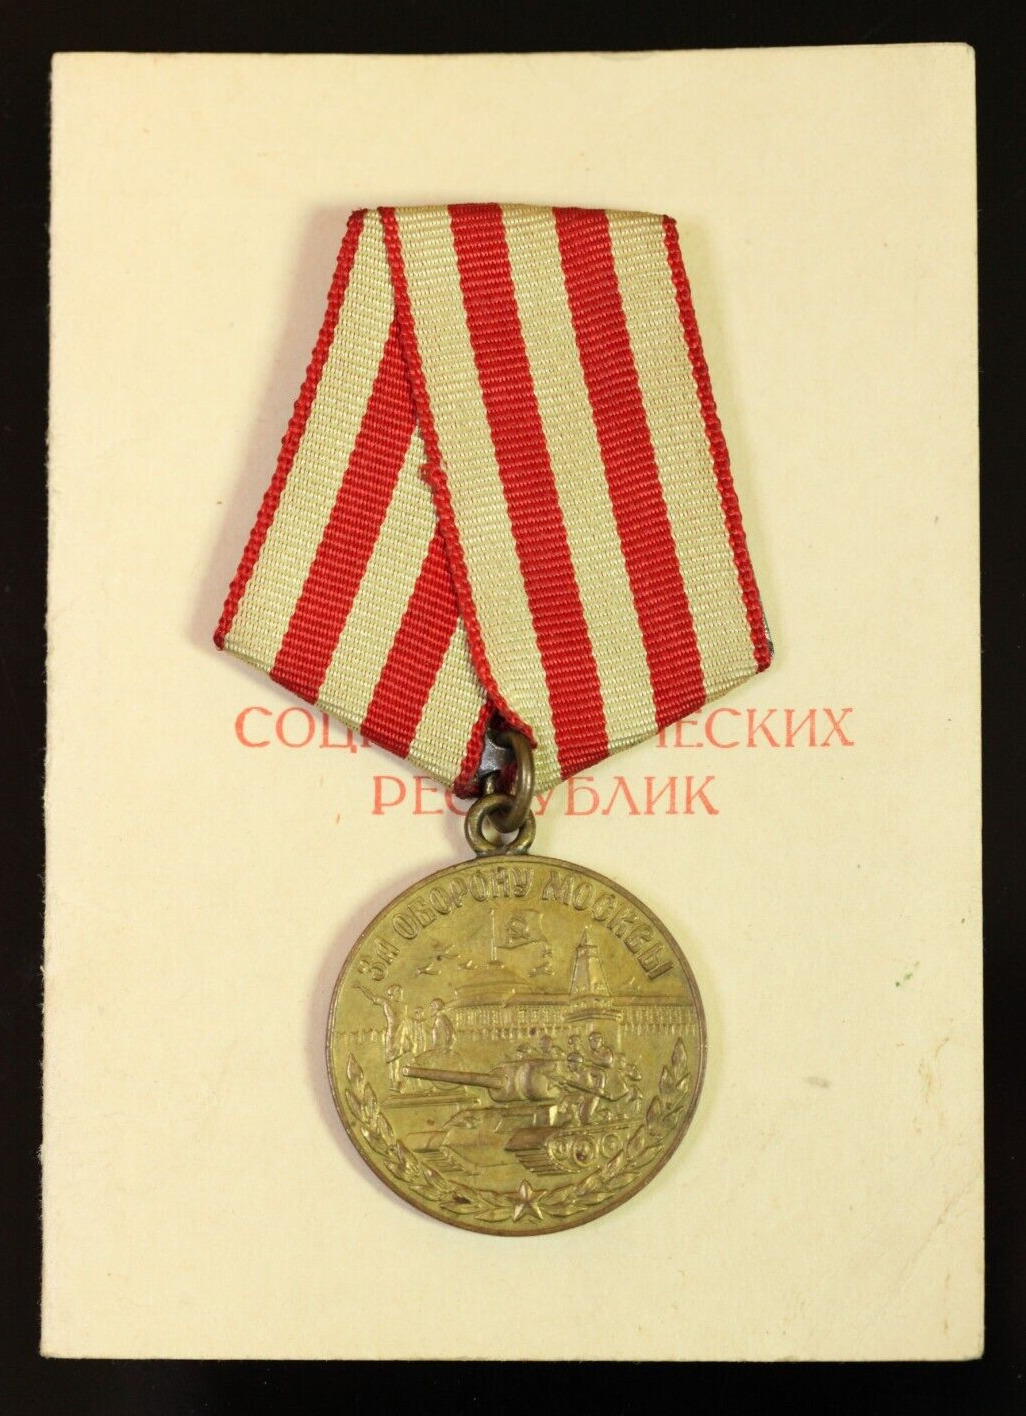 Original USSR Soviet WWII Red Army Medal FOR THE DEFENCE OF MOSCOW + DOC. (1371)